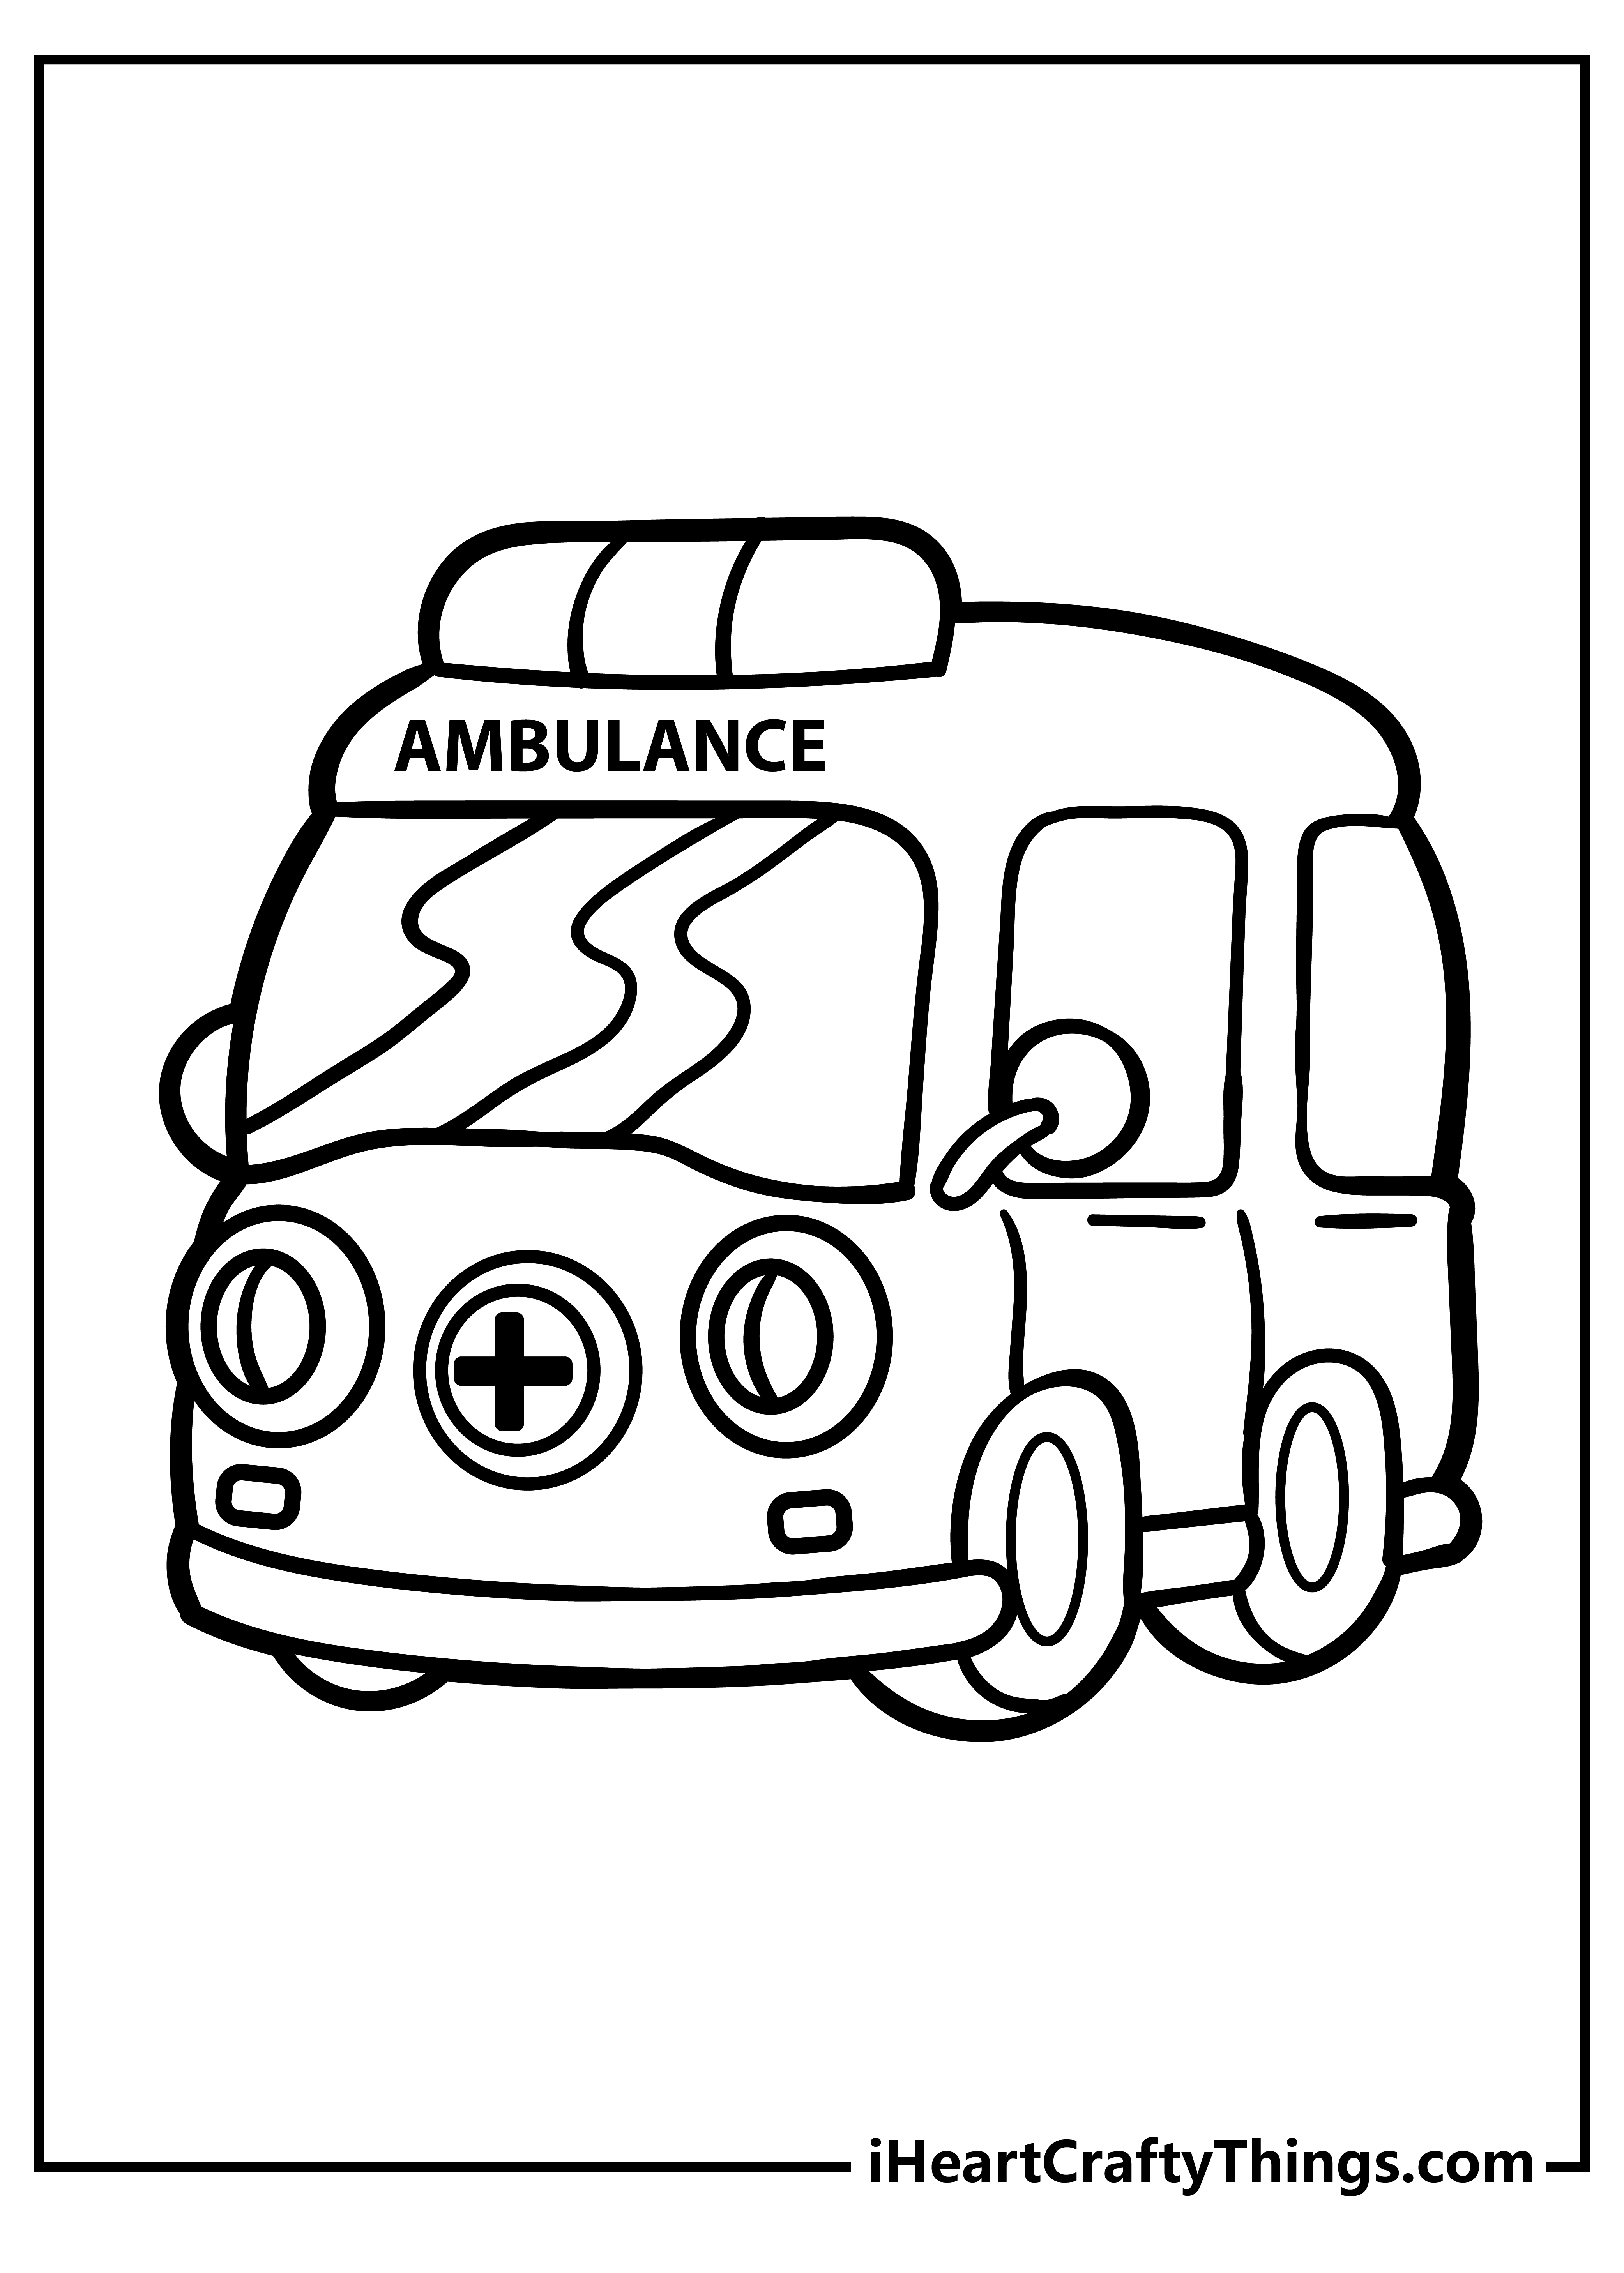 Ambulance Coloring Pages for kids free download